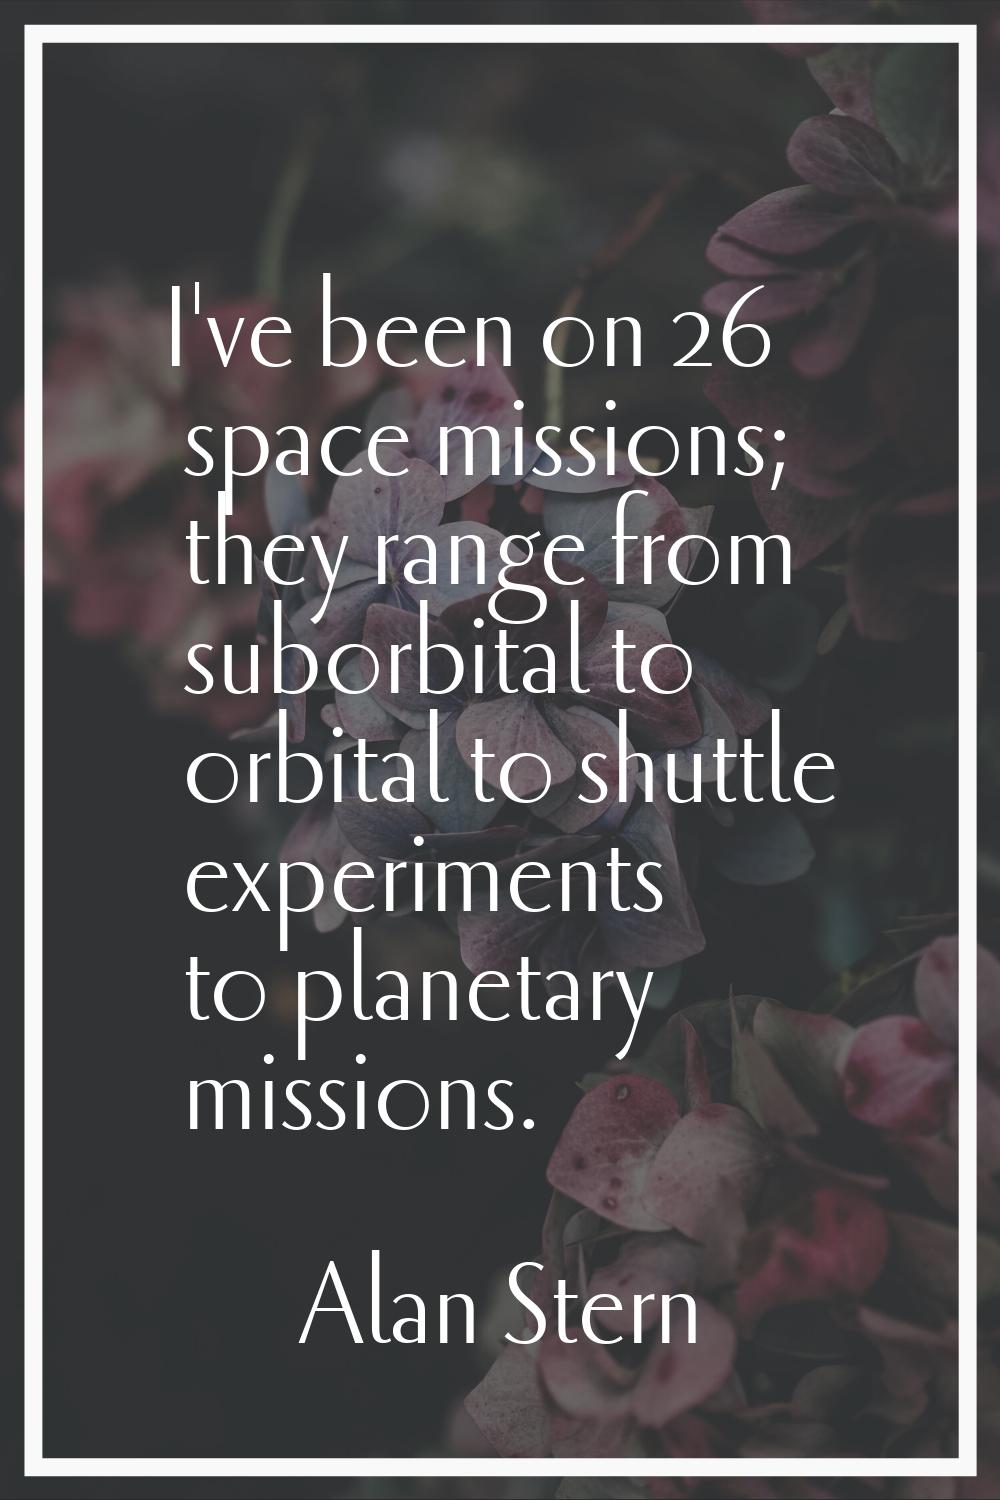 I've been on 26 space missions; they range from suborbital to orbital to shuttle experiments to pla